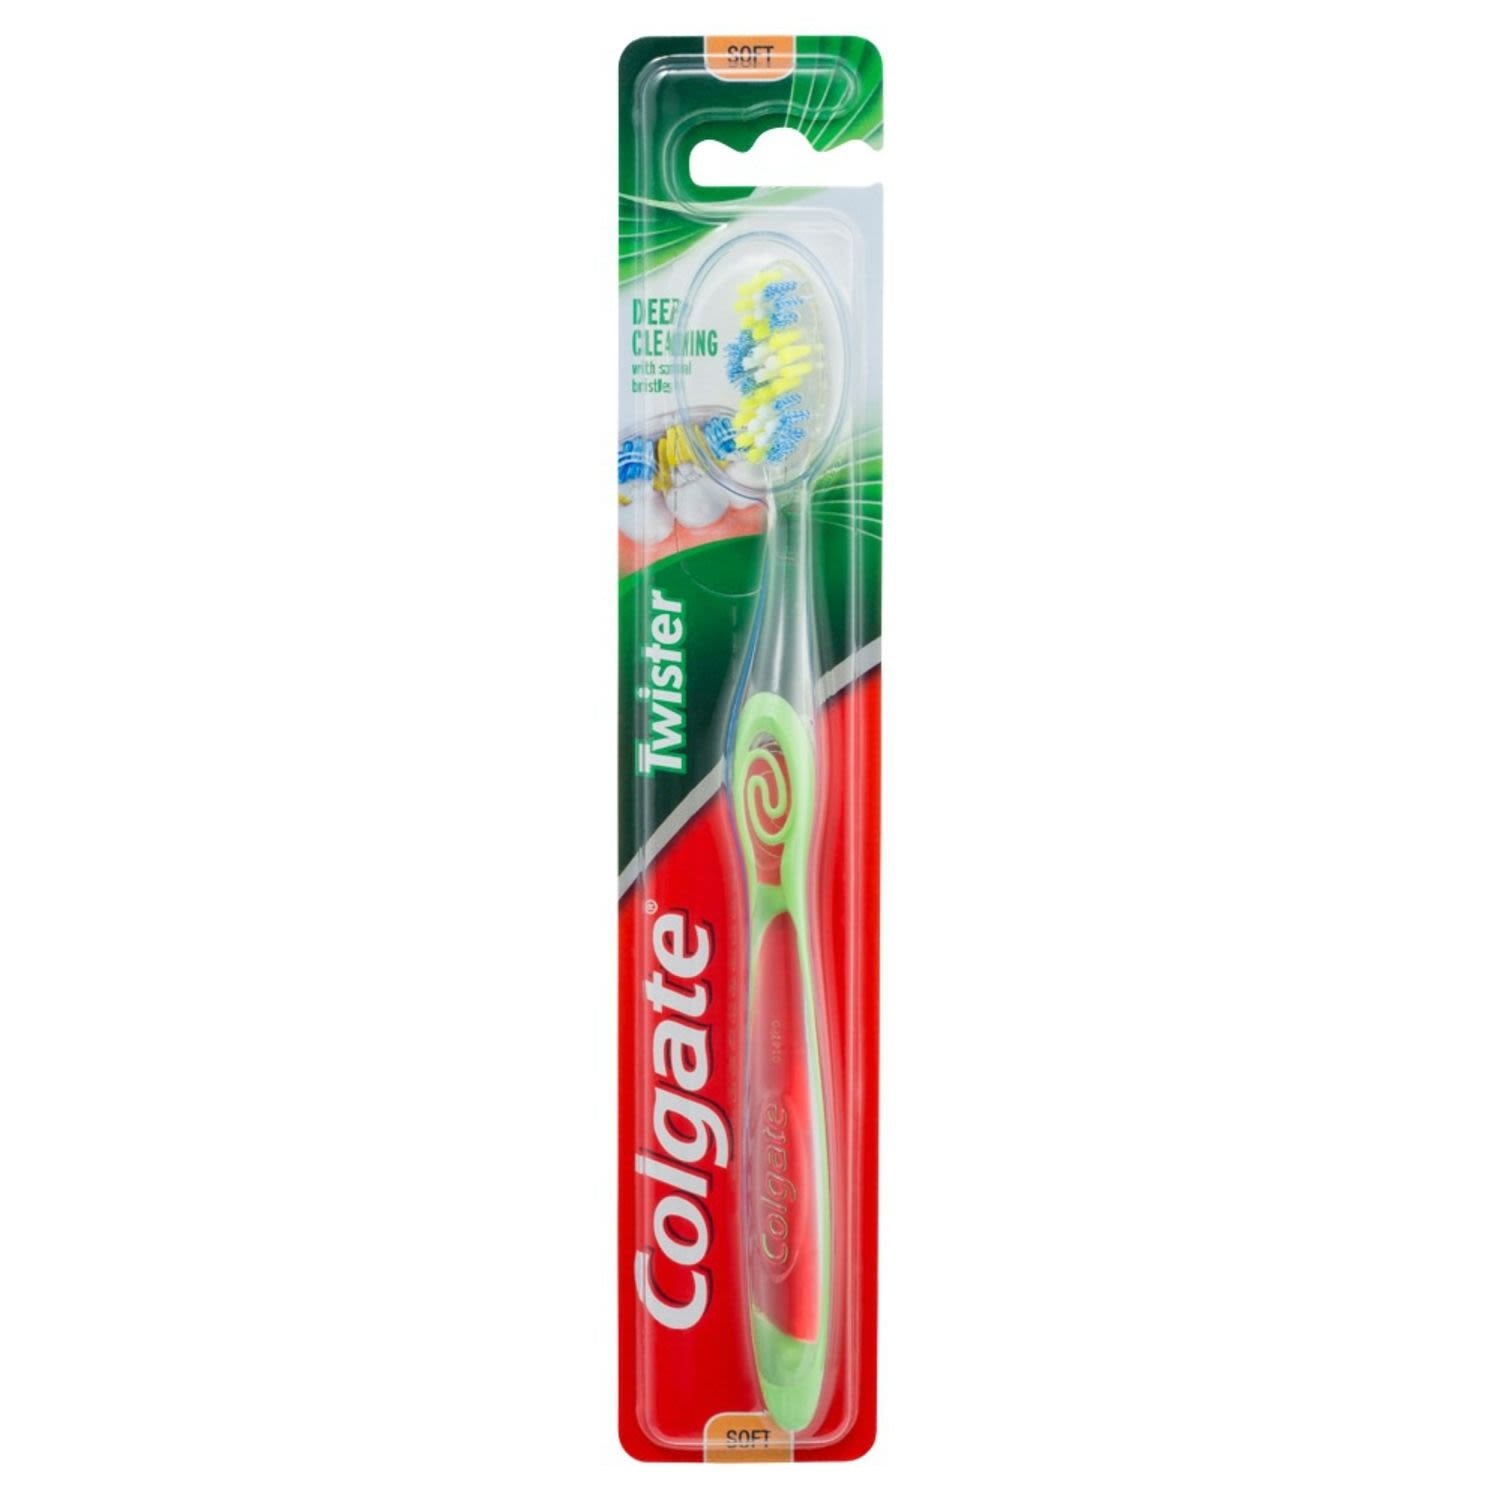 Colgate Twister Soft Deep Cleaning Toothbrush 1pk